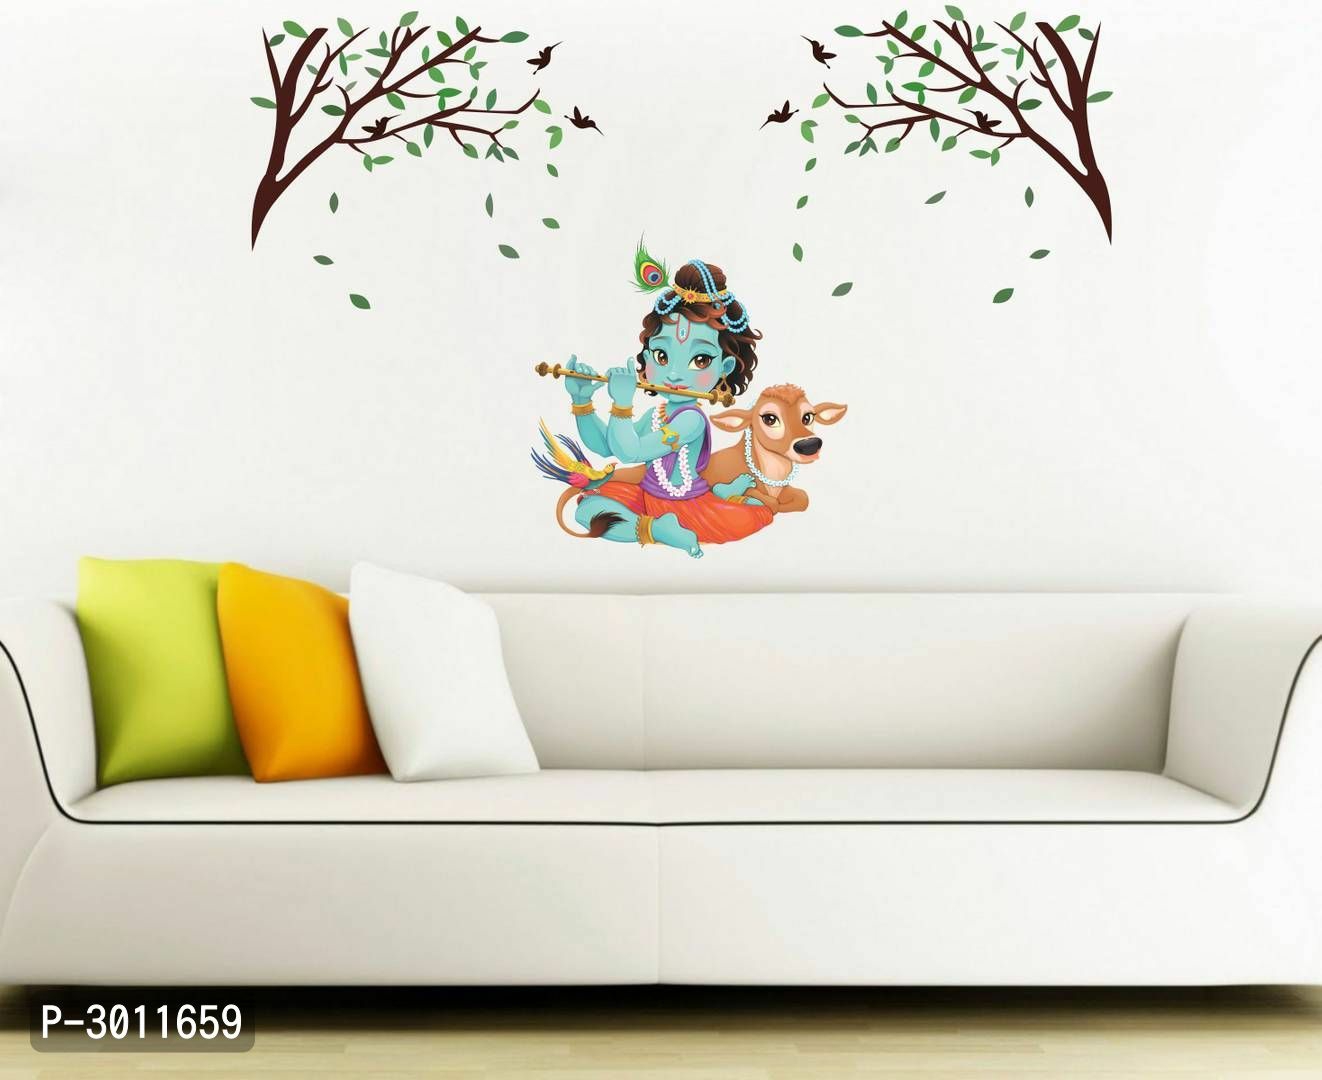 Wall Stickers, Wall Sticker For Living Room -Bedroom - Office - Home Hall  Decor